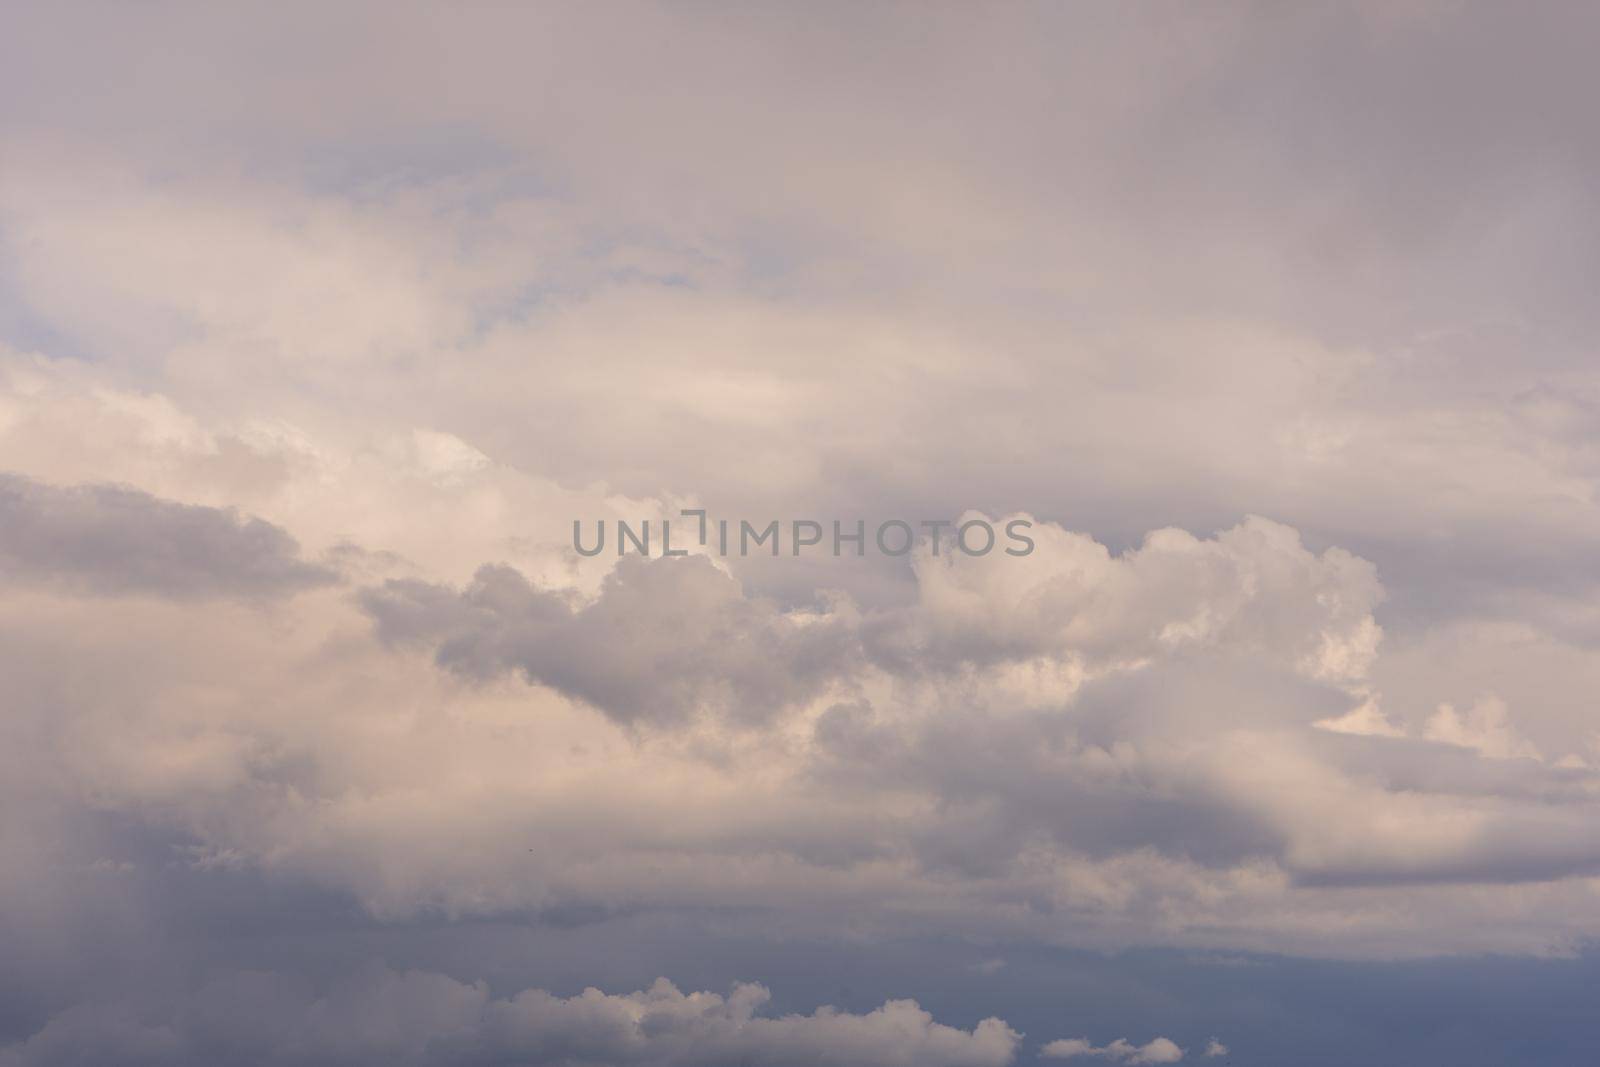 Clouds in the blue sky indicate the arrival of a disturbance by brambillasimone